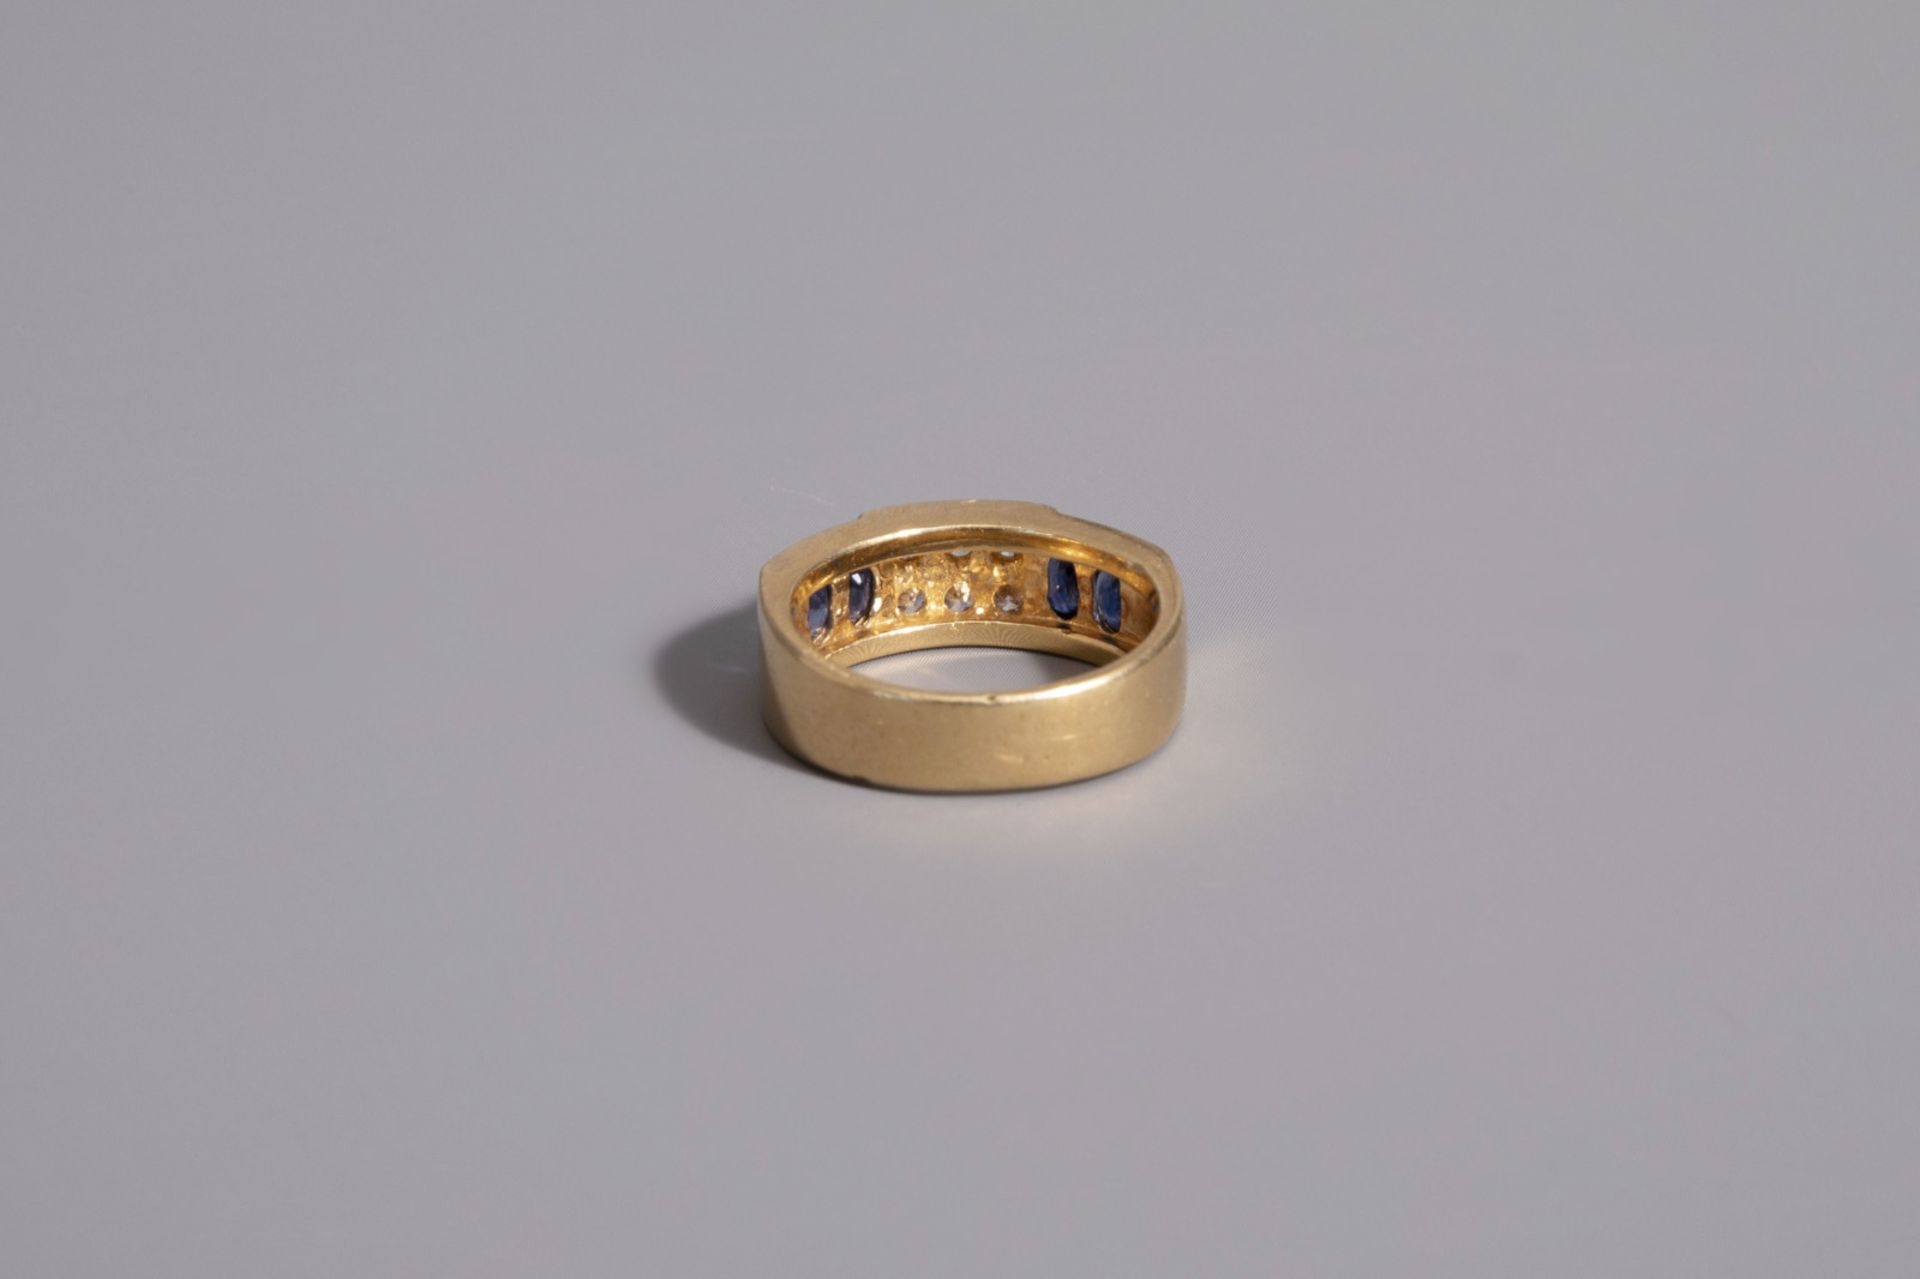 An 18 carat yellow gold ring set with four blue sapphires and six diamonds, 20th C. - Image 2 of 2